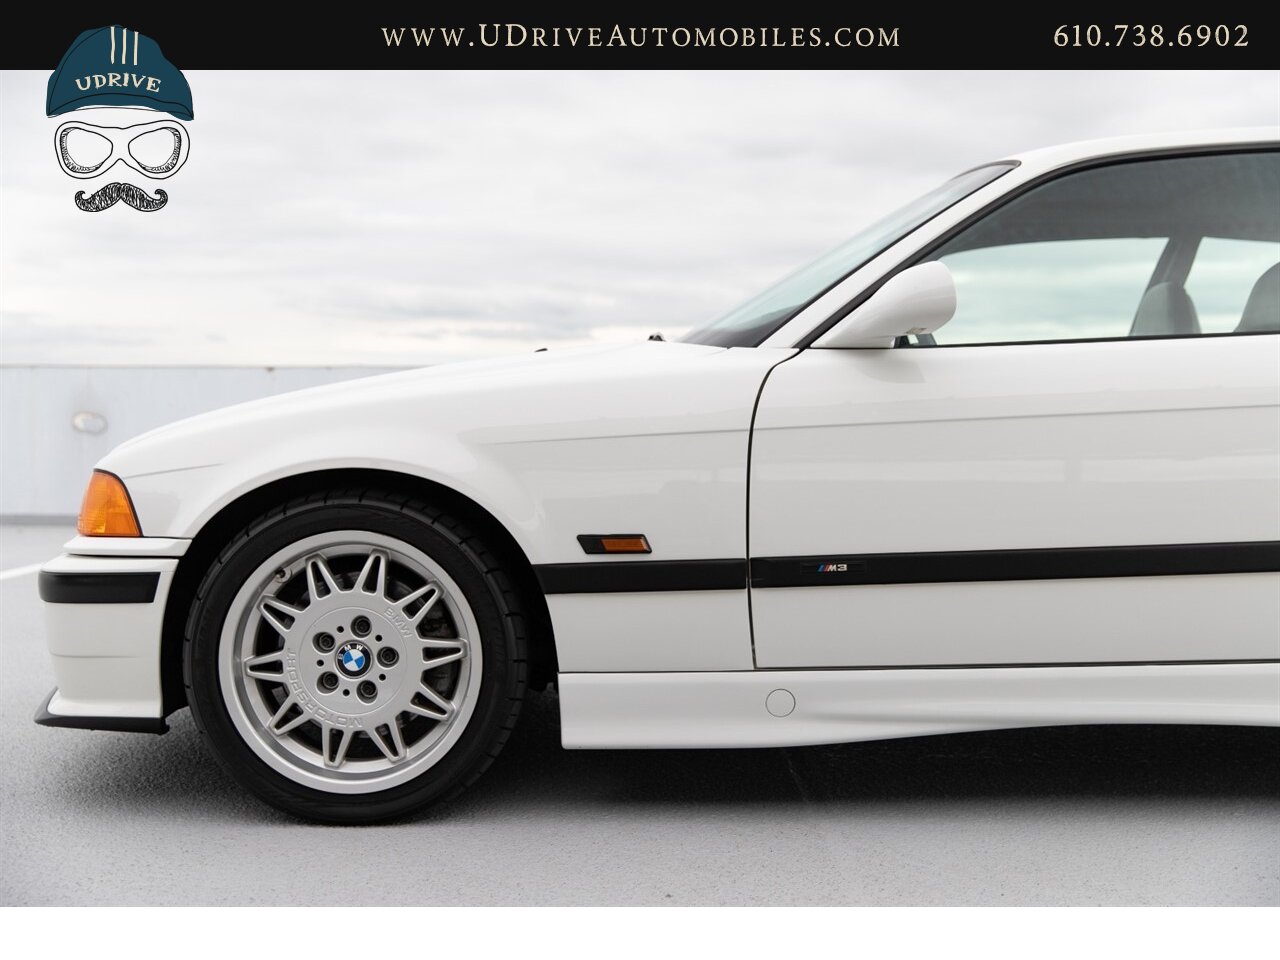 1995 BMW M3 E36 Alpine White over Black Vader Seats  5 Speed - Photo 7 - West Chester, PA 19382